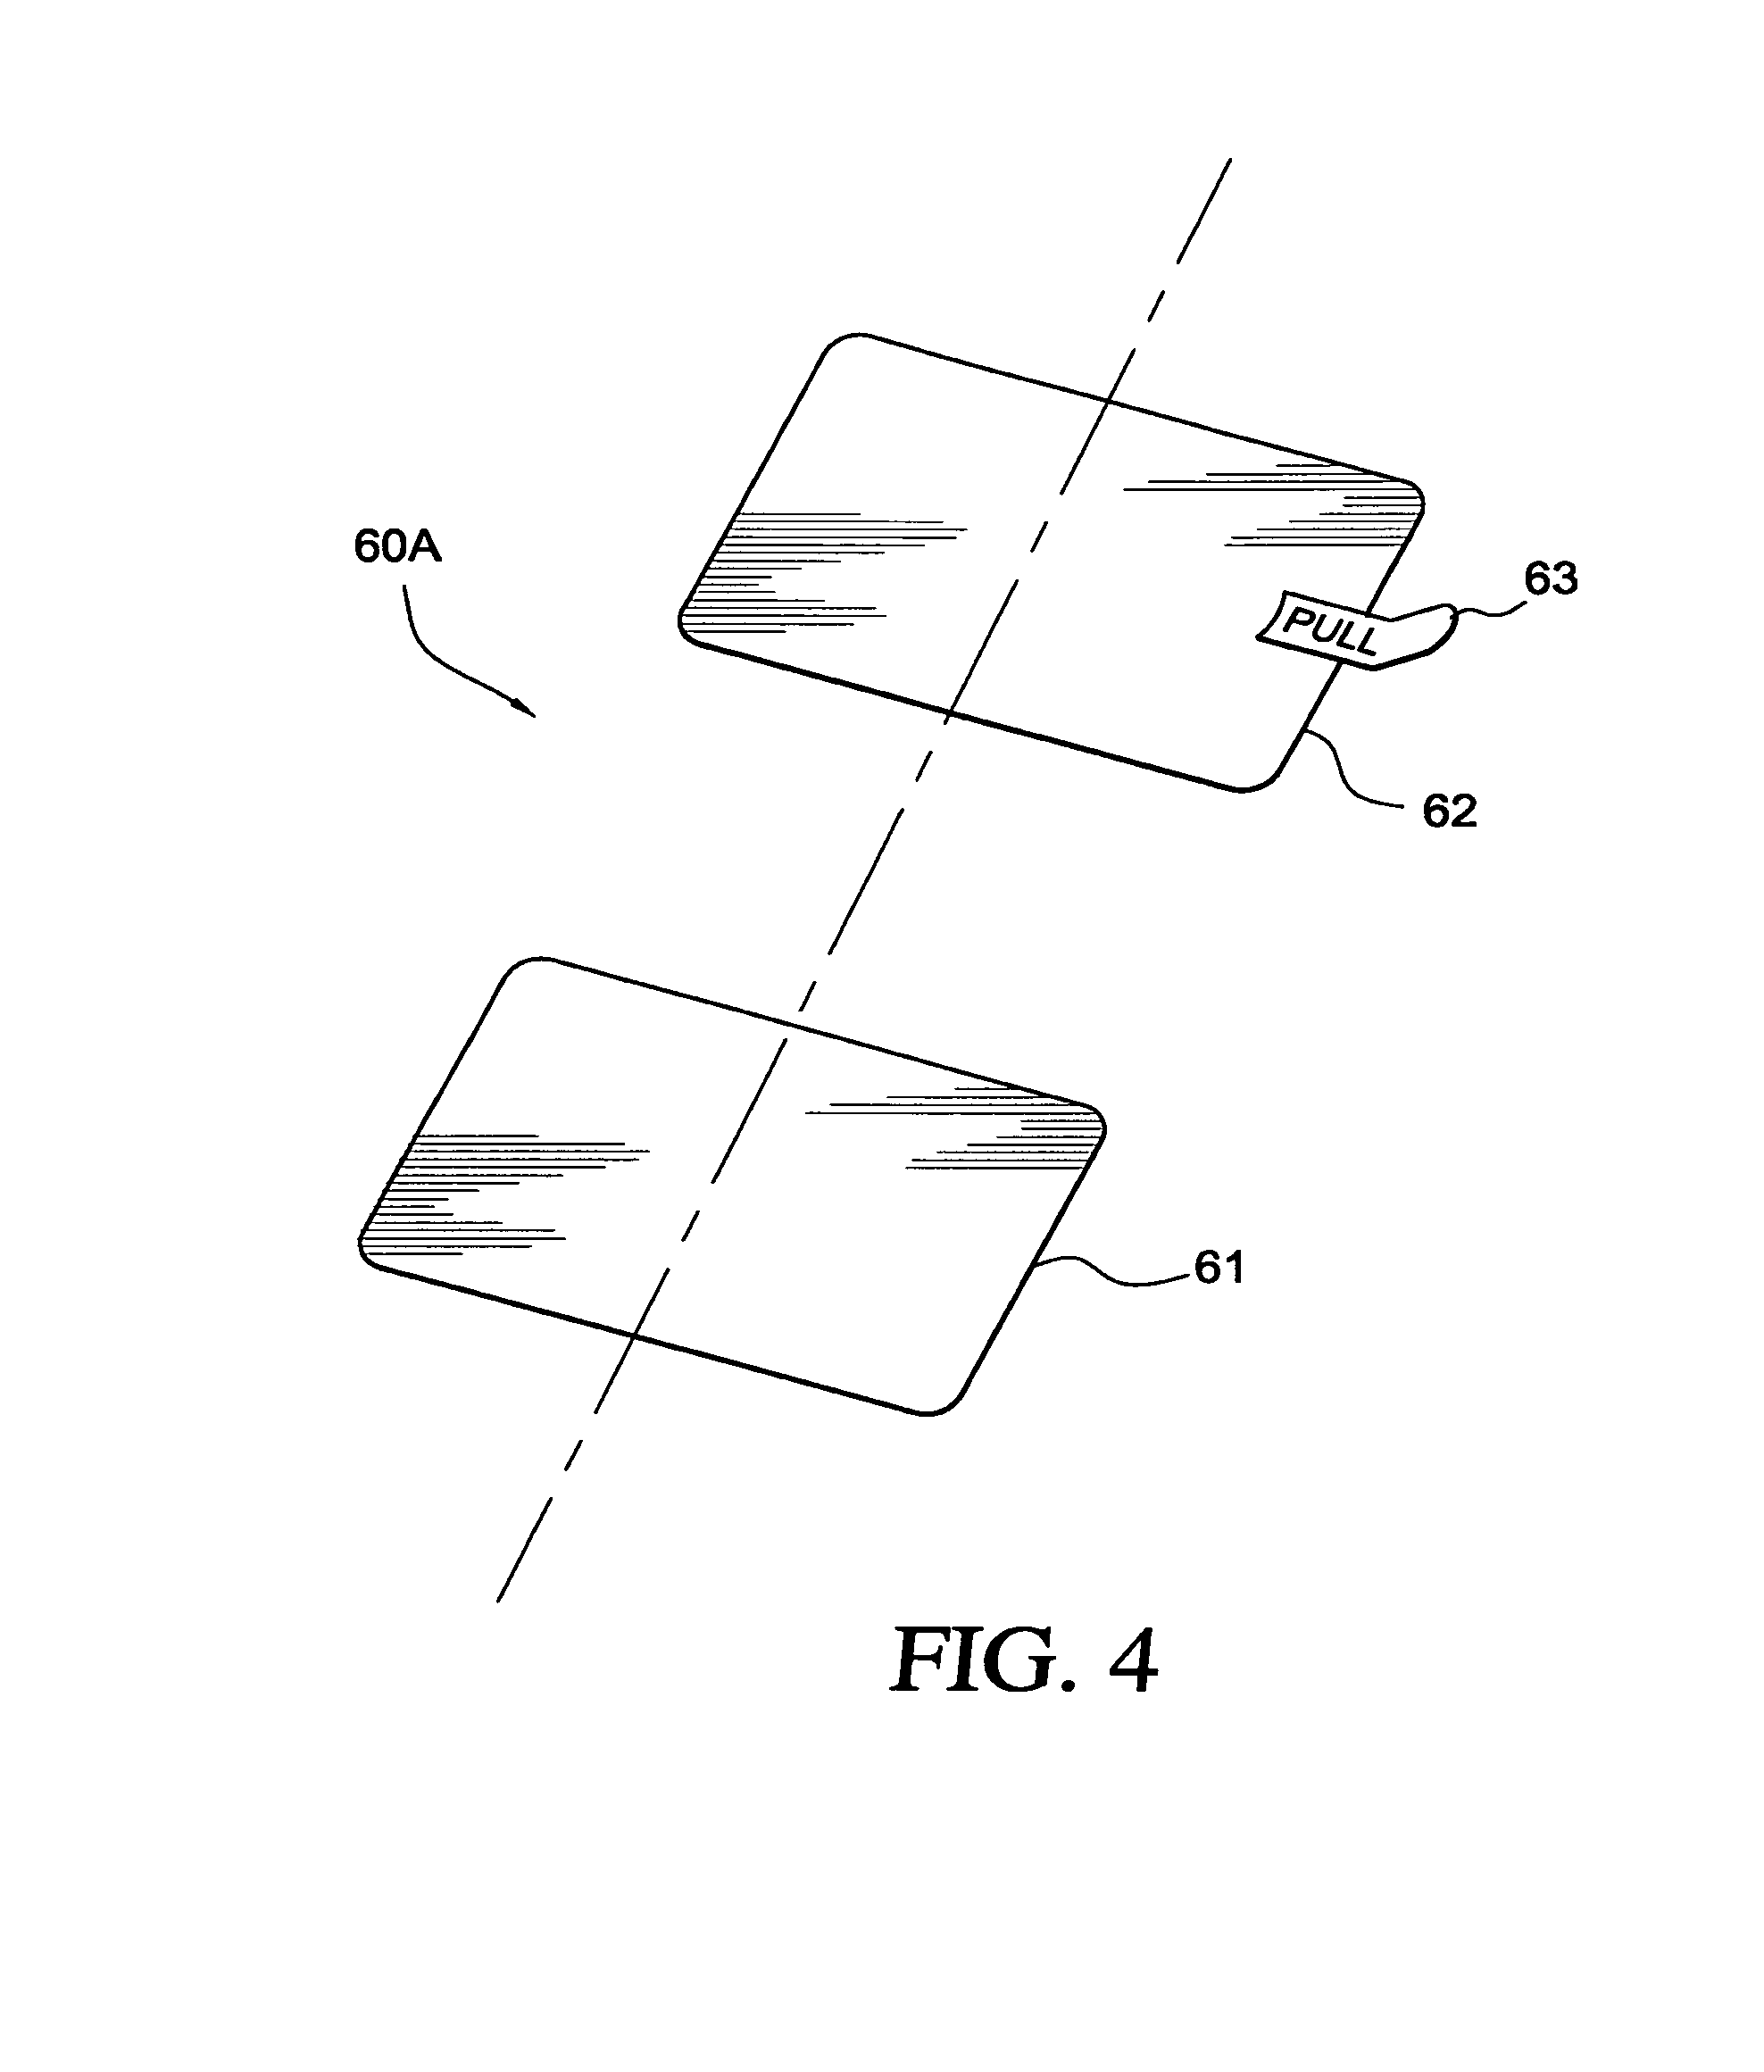 Treatment of modified atmosphere packaging